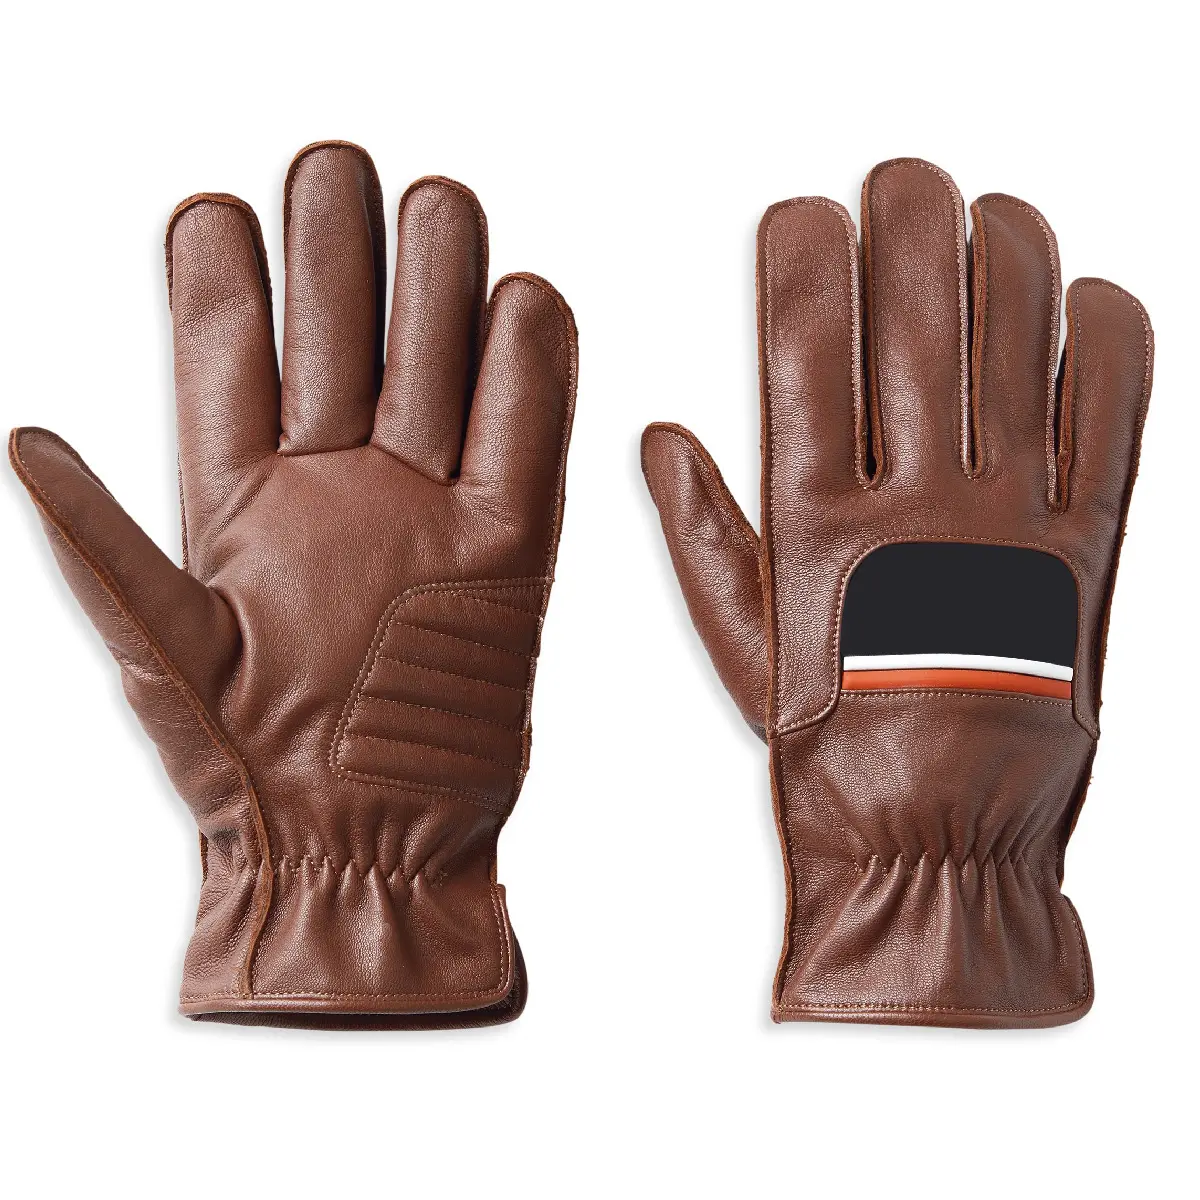 High quality Goat Leather Winter Gloves Latest Fashion Soft Brown Leather Gloves for Men